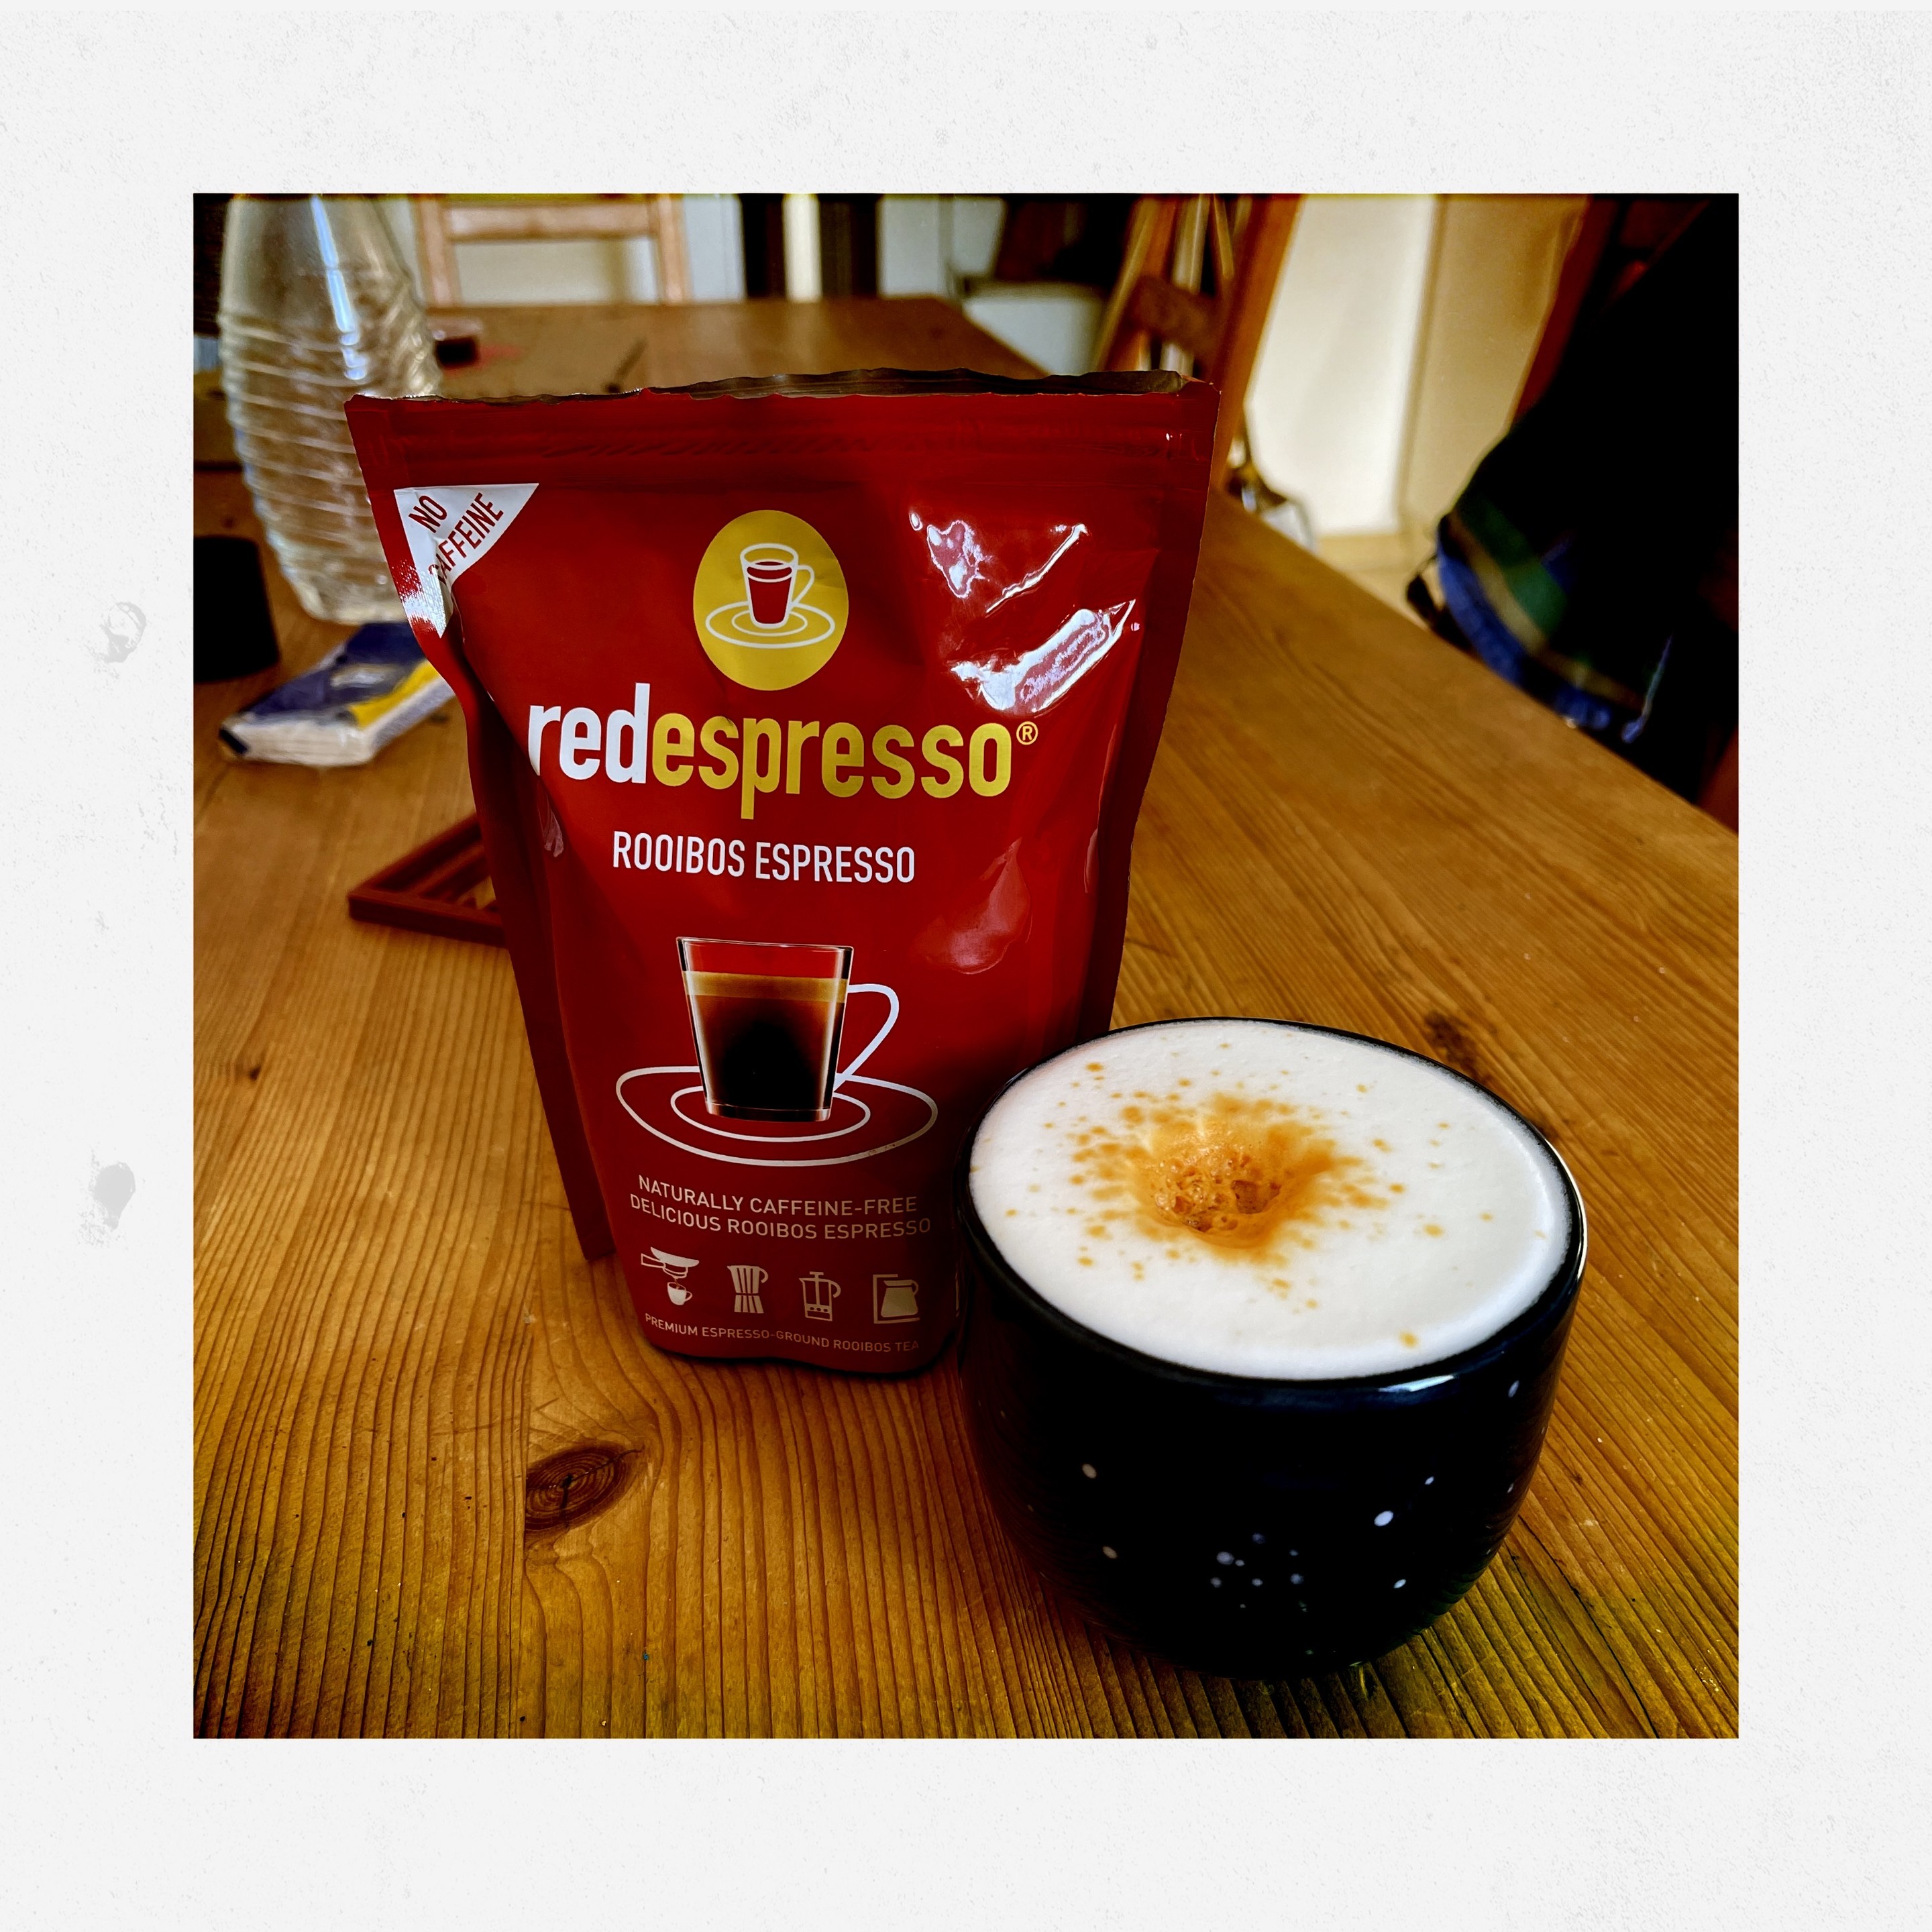 A red bag of redespresso (rooibos espresso) standing next to a dark blue cup with frothed milk and some orange/light brown sprinkles and n top. Both standing on a wooden table. 